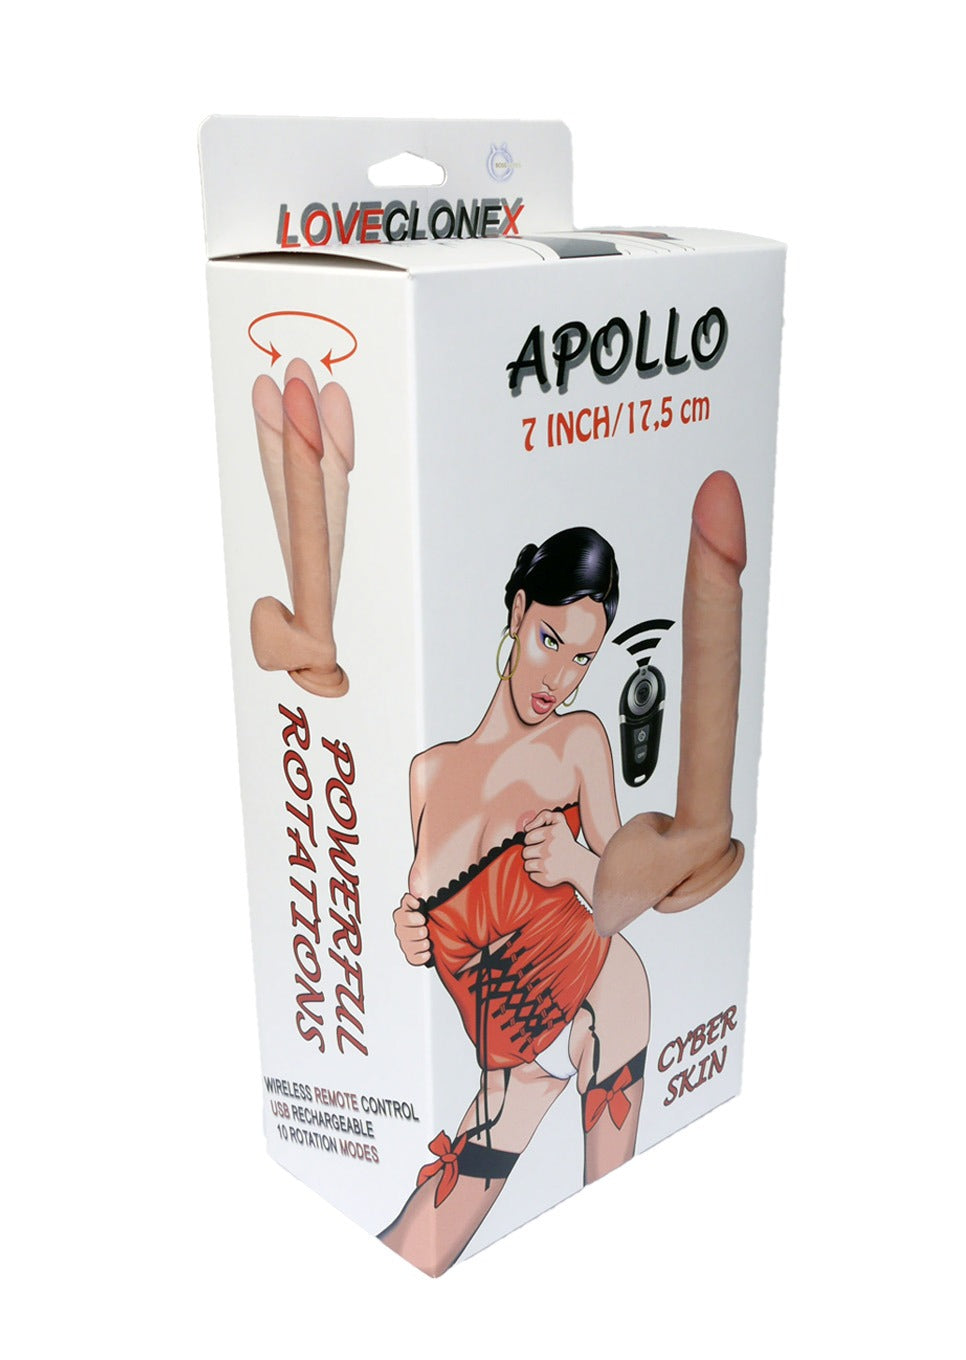 Bossoftoys - 21-00005 - Apollo - Loveclonex - Ultra Realistic Vibrator - Cyber skin feels like real - Better then Silicone - 5-7 cm thick - Suction Cup - Wireless Remote - Rechargeable - Flesh - 7 inch / 17.5 cm